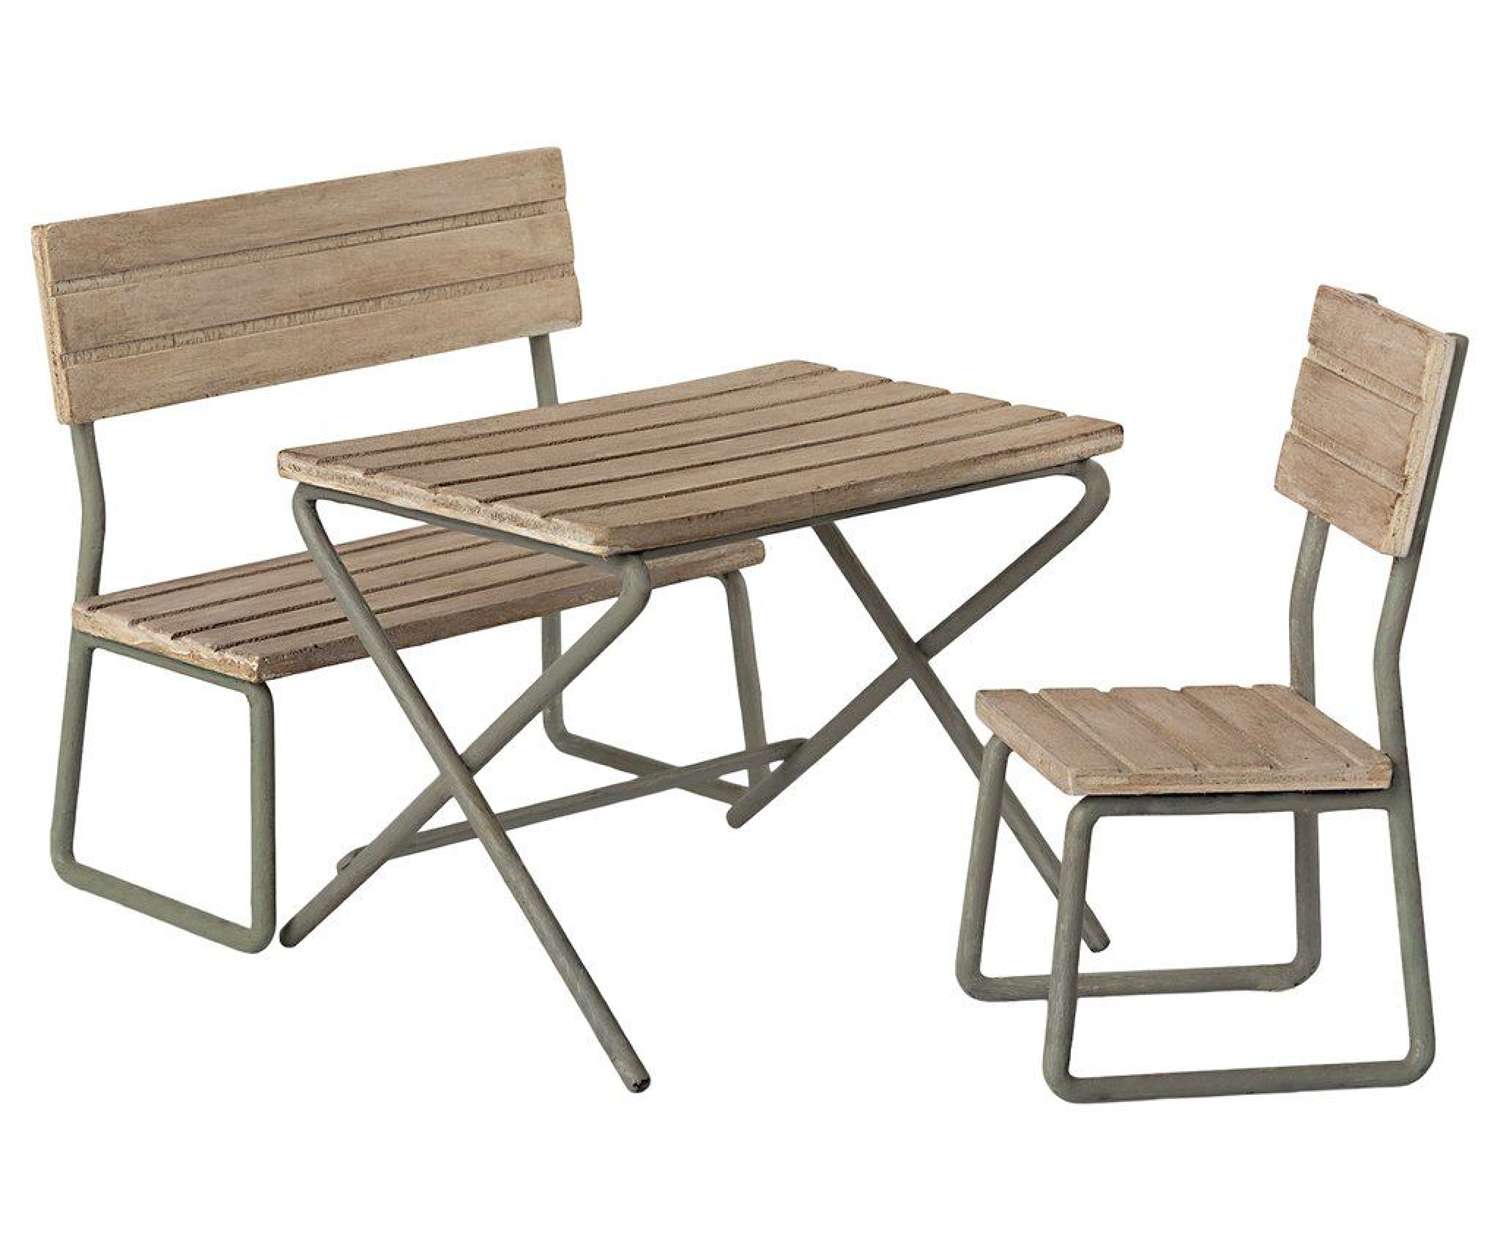 Maileg- garden set - consists of table ,bench, chair in wood & metal